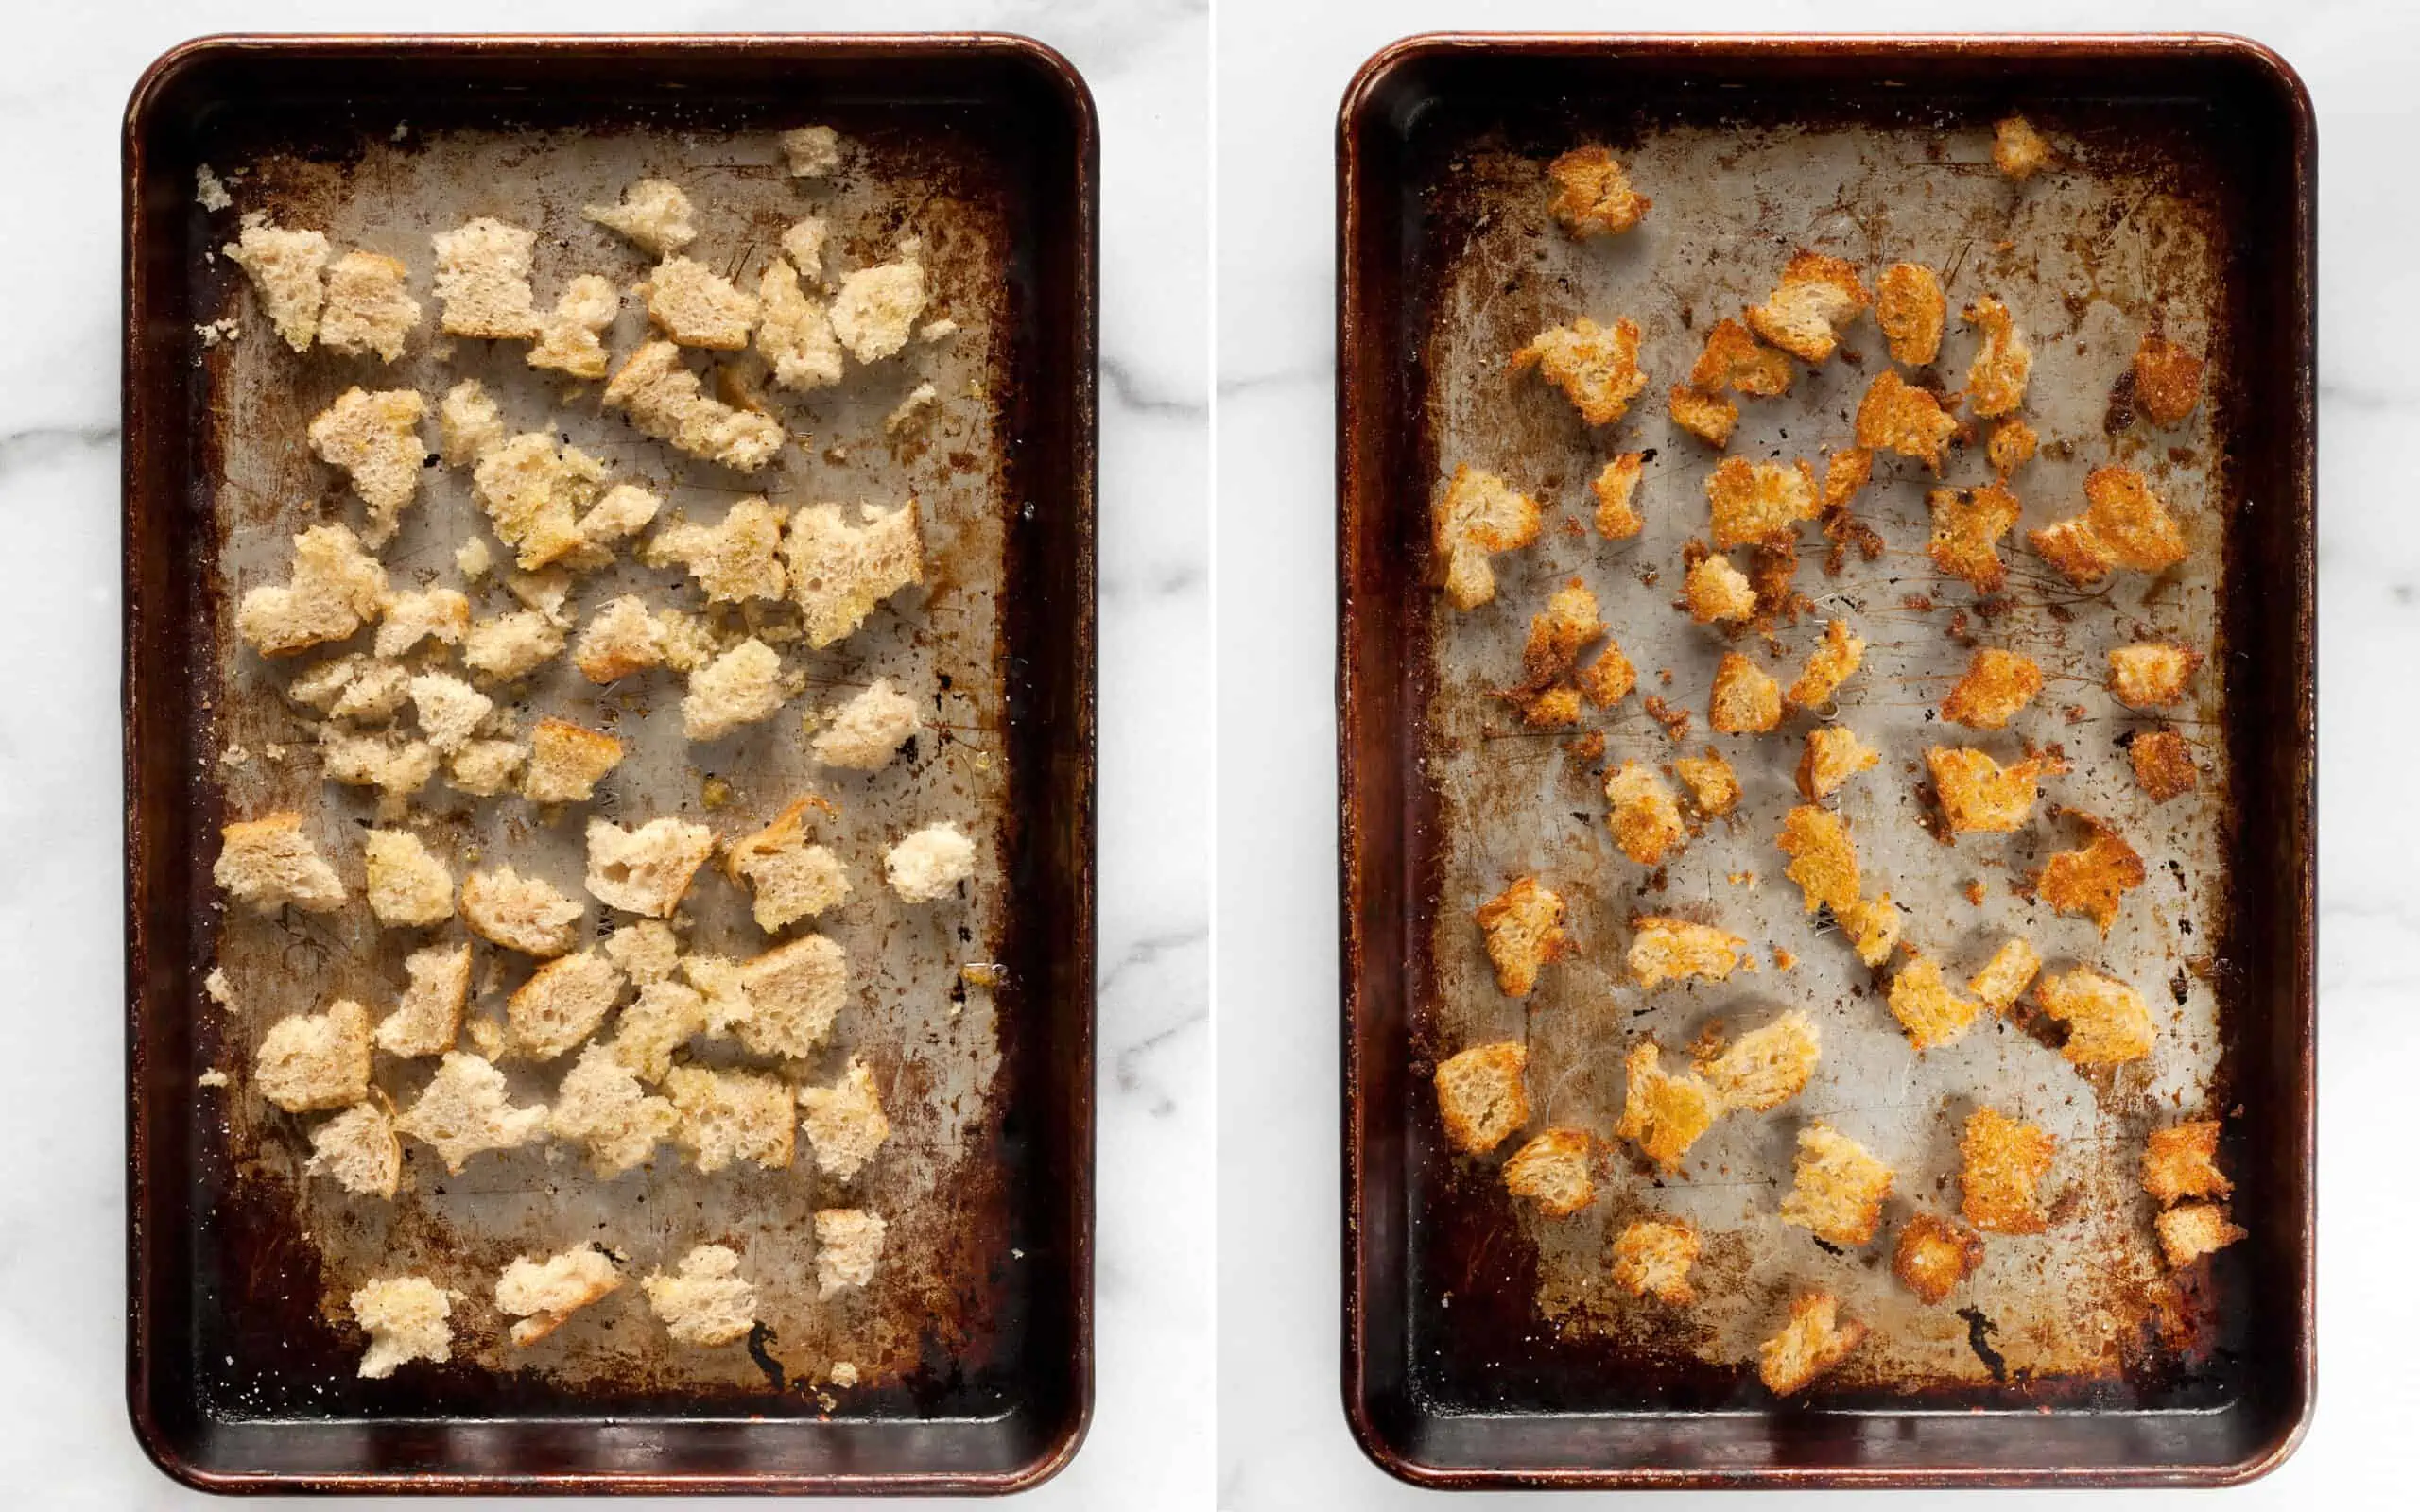 Bread on sheet pan before and after it is toasted in the oven to make croutons.